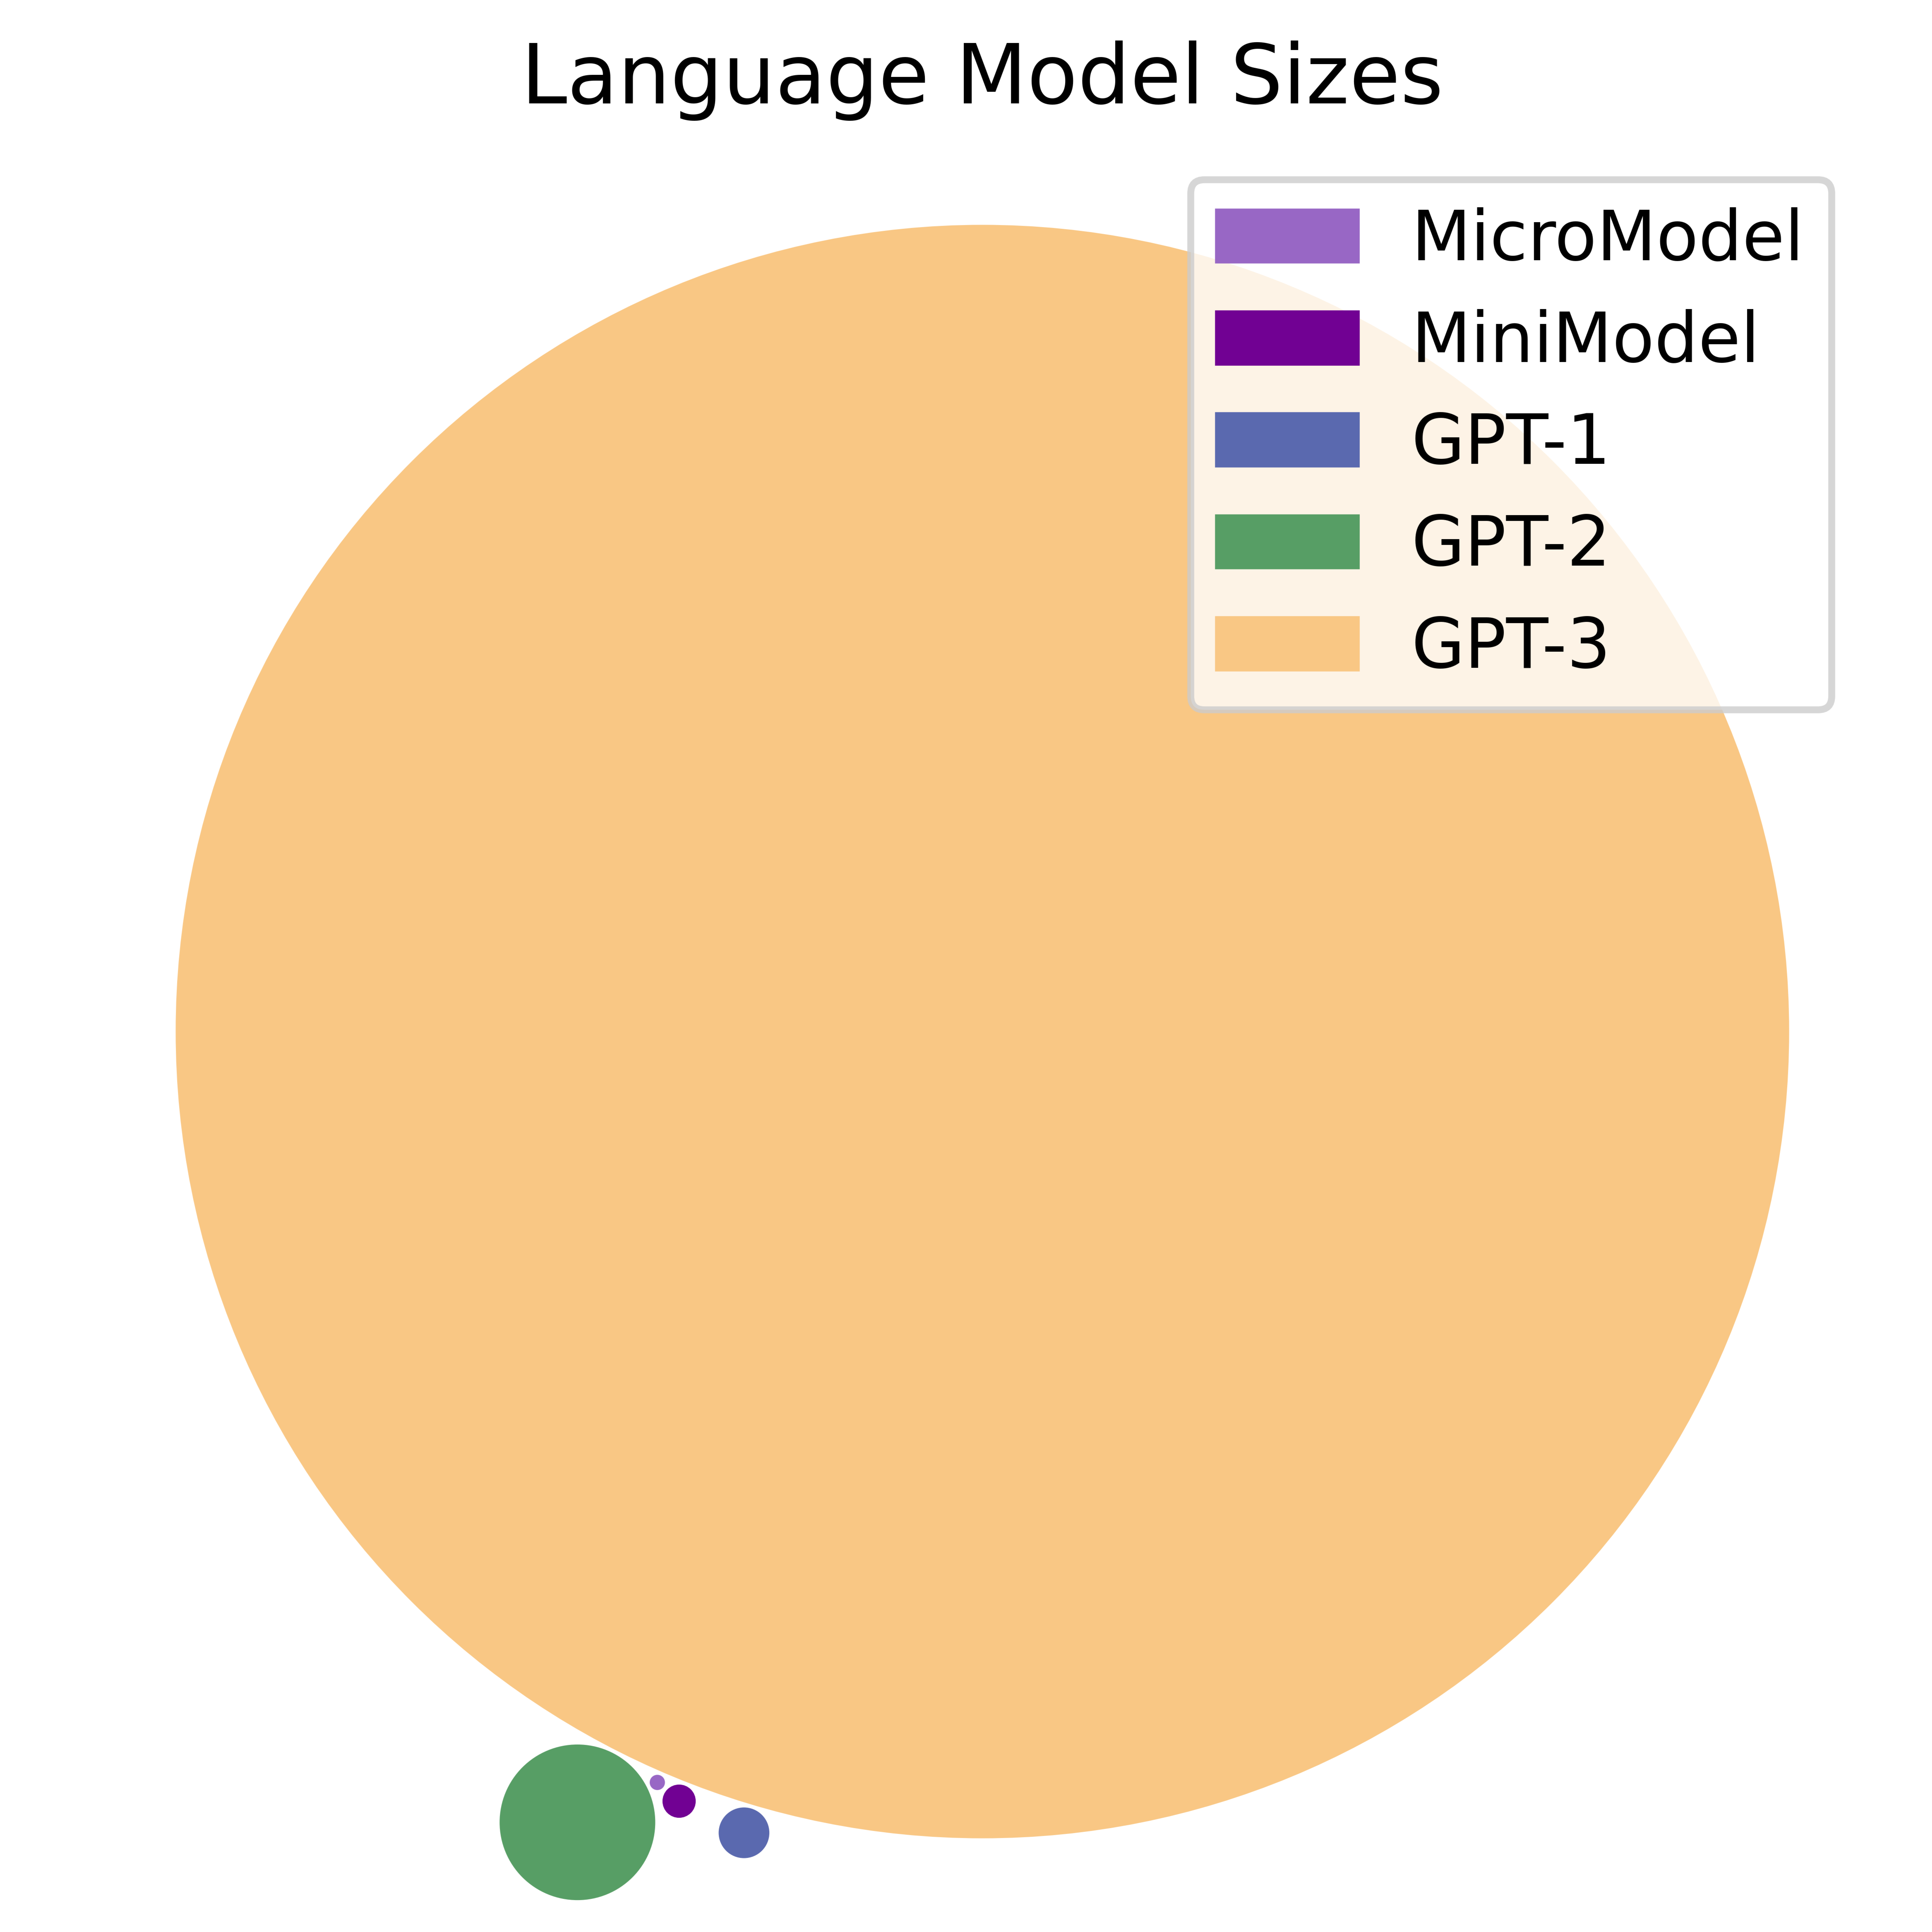 Visualization of the size in number of parameters of my MiniModel and MicroModel with ChatGPT 1,2, and 3.